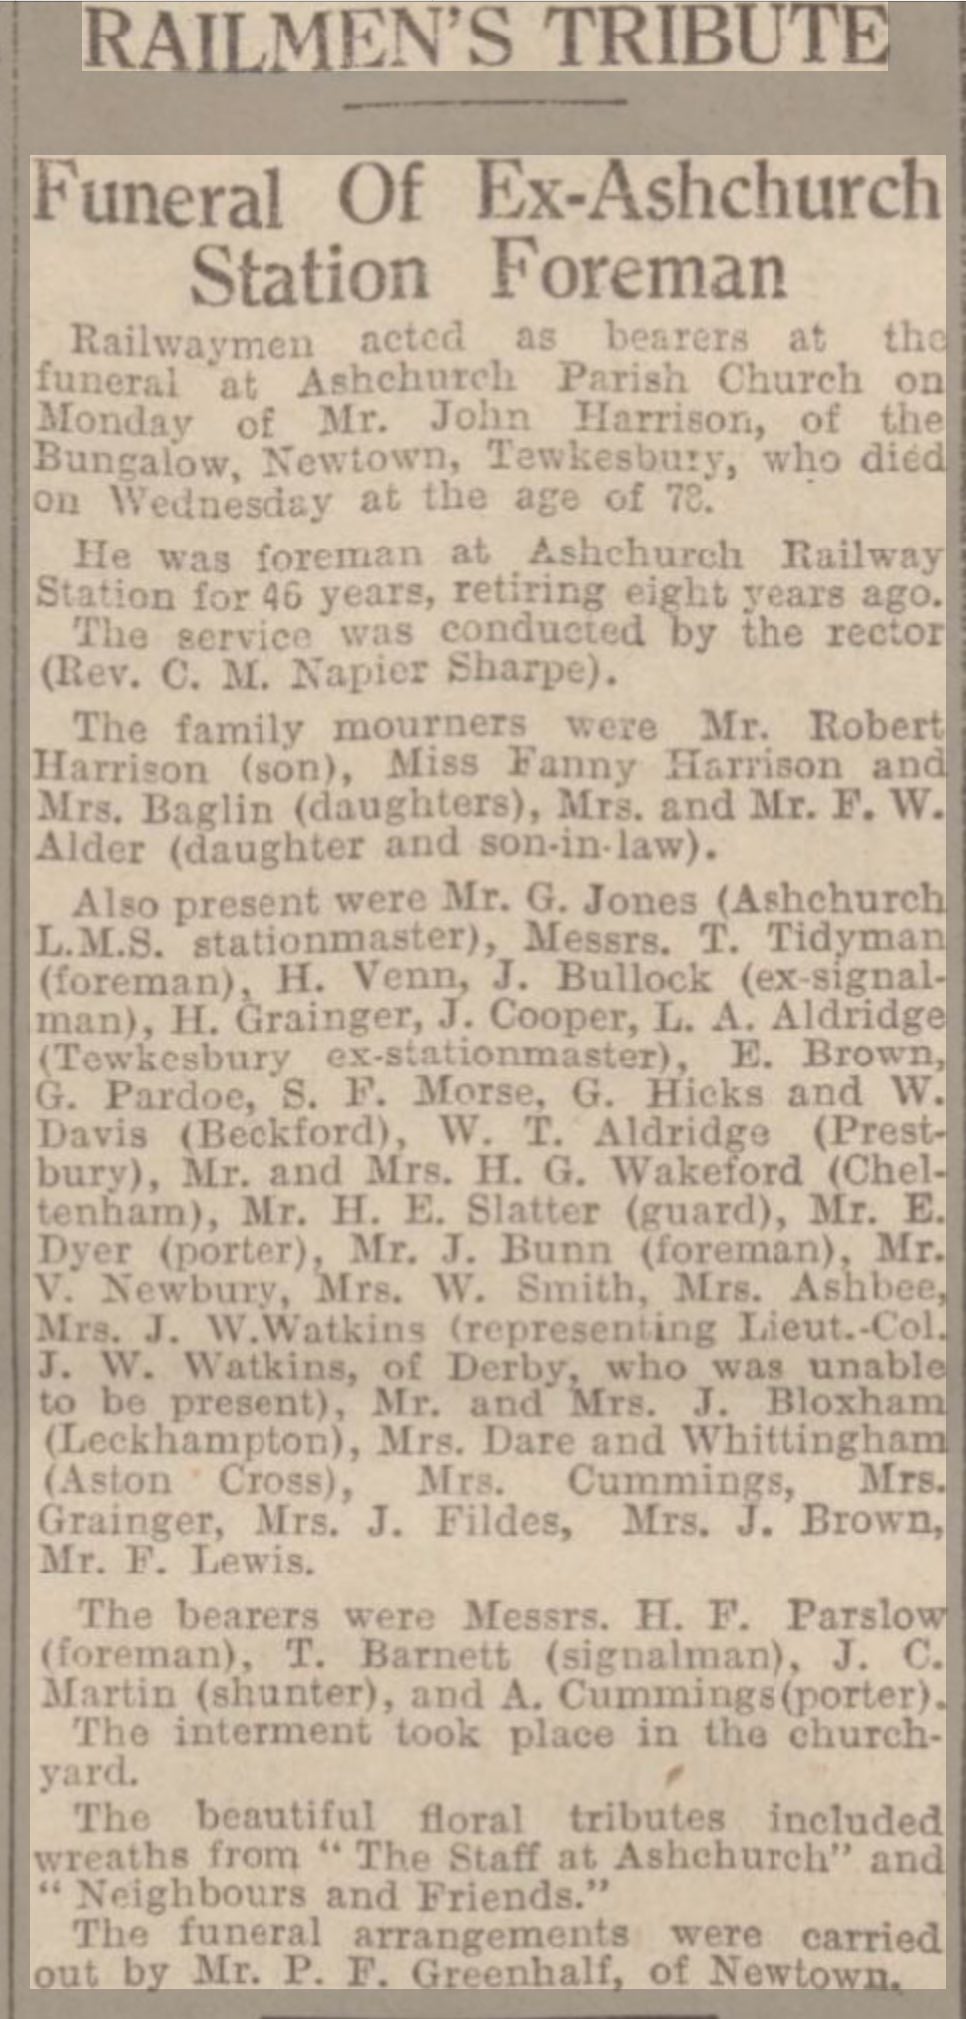 Press clipping from the Cheltenham Chronicle 06 May 1933 with details of John Harrison's funeral